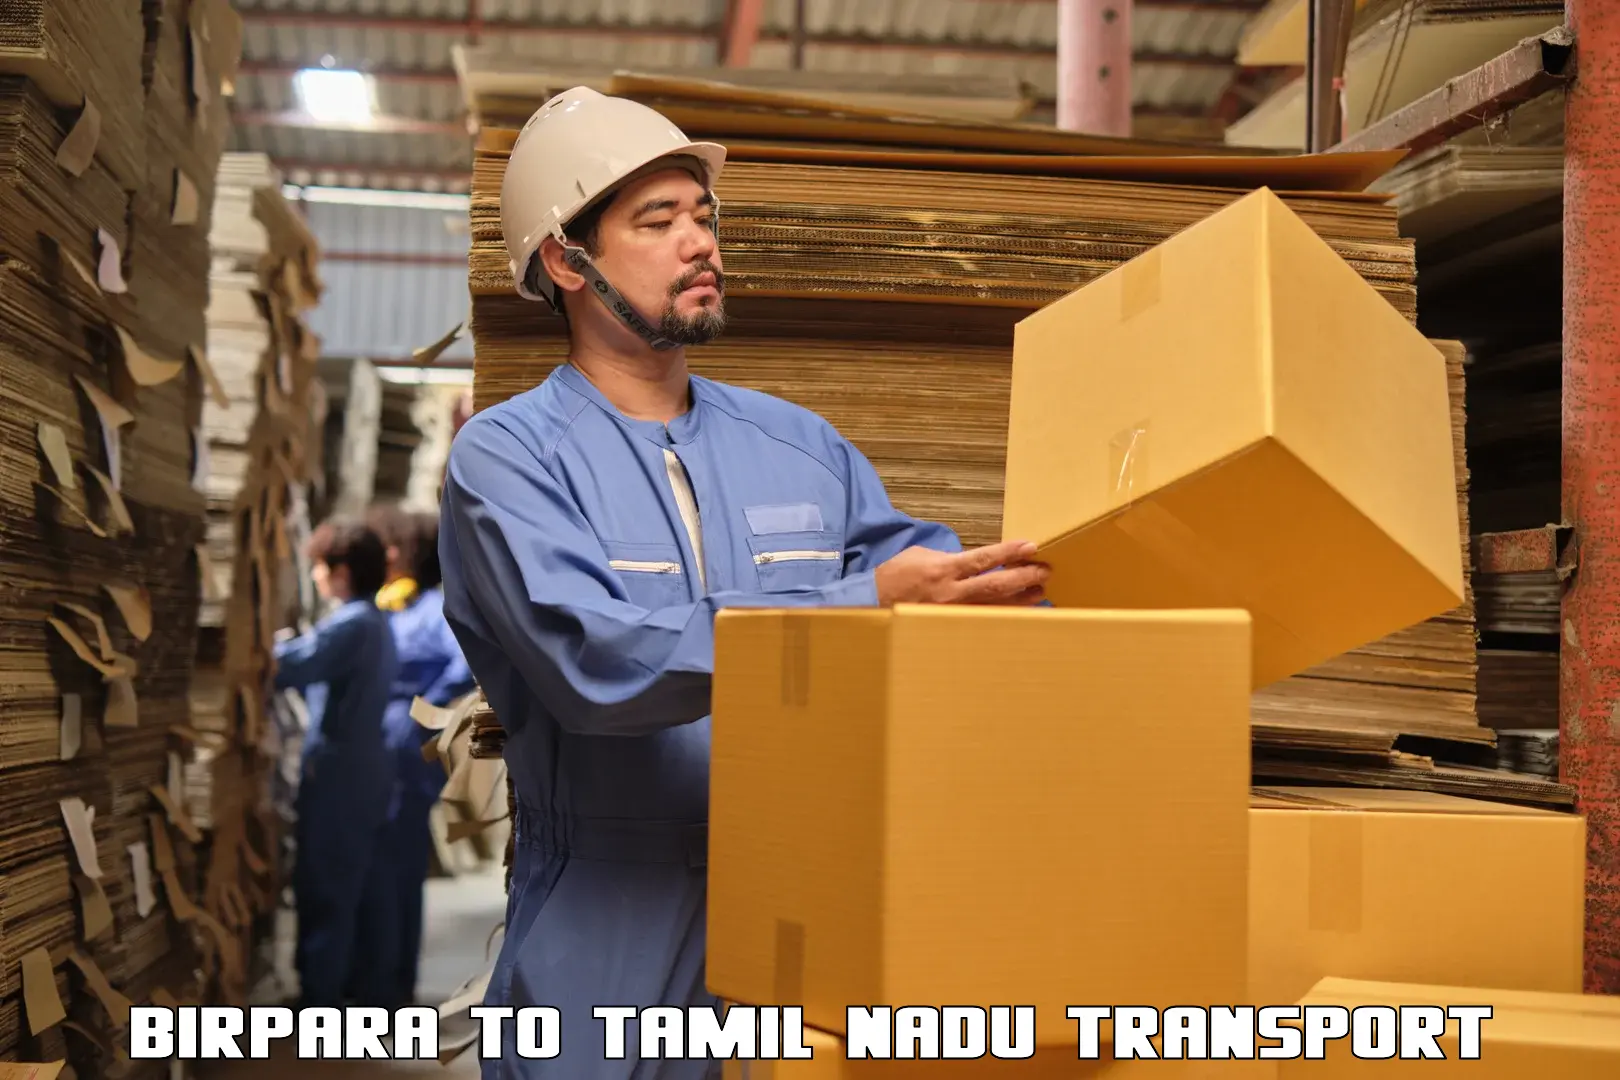 Part load transport service in India Birpara to Gobichettipalayam